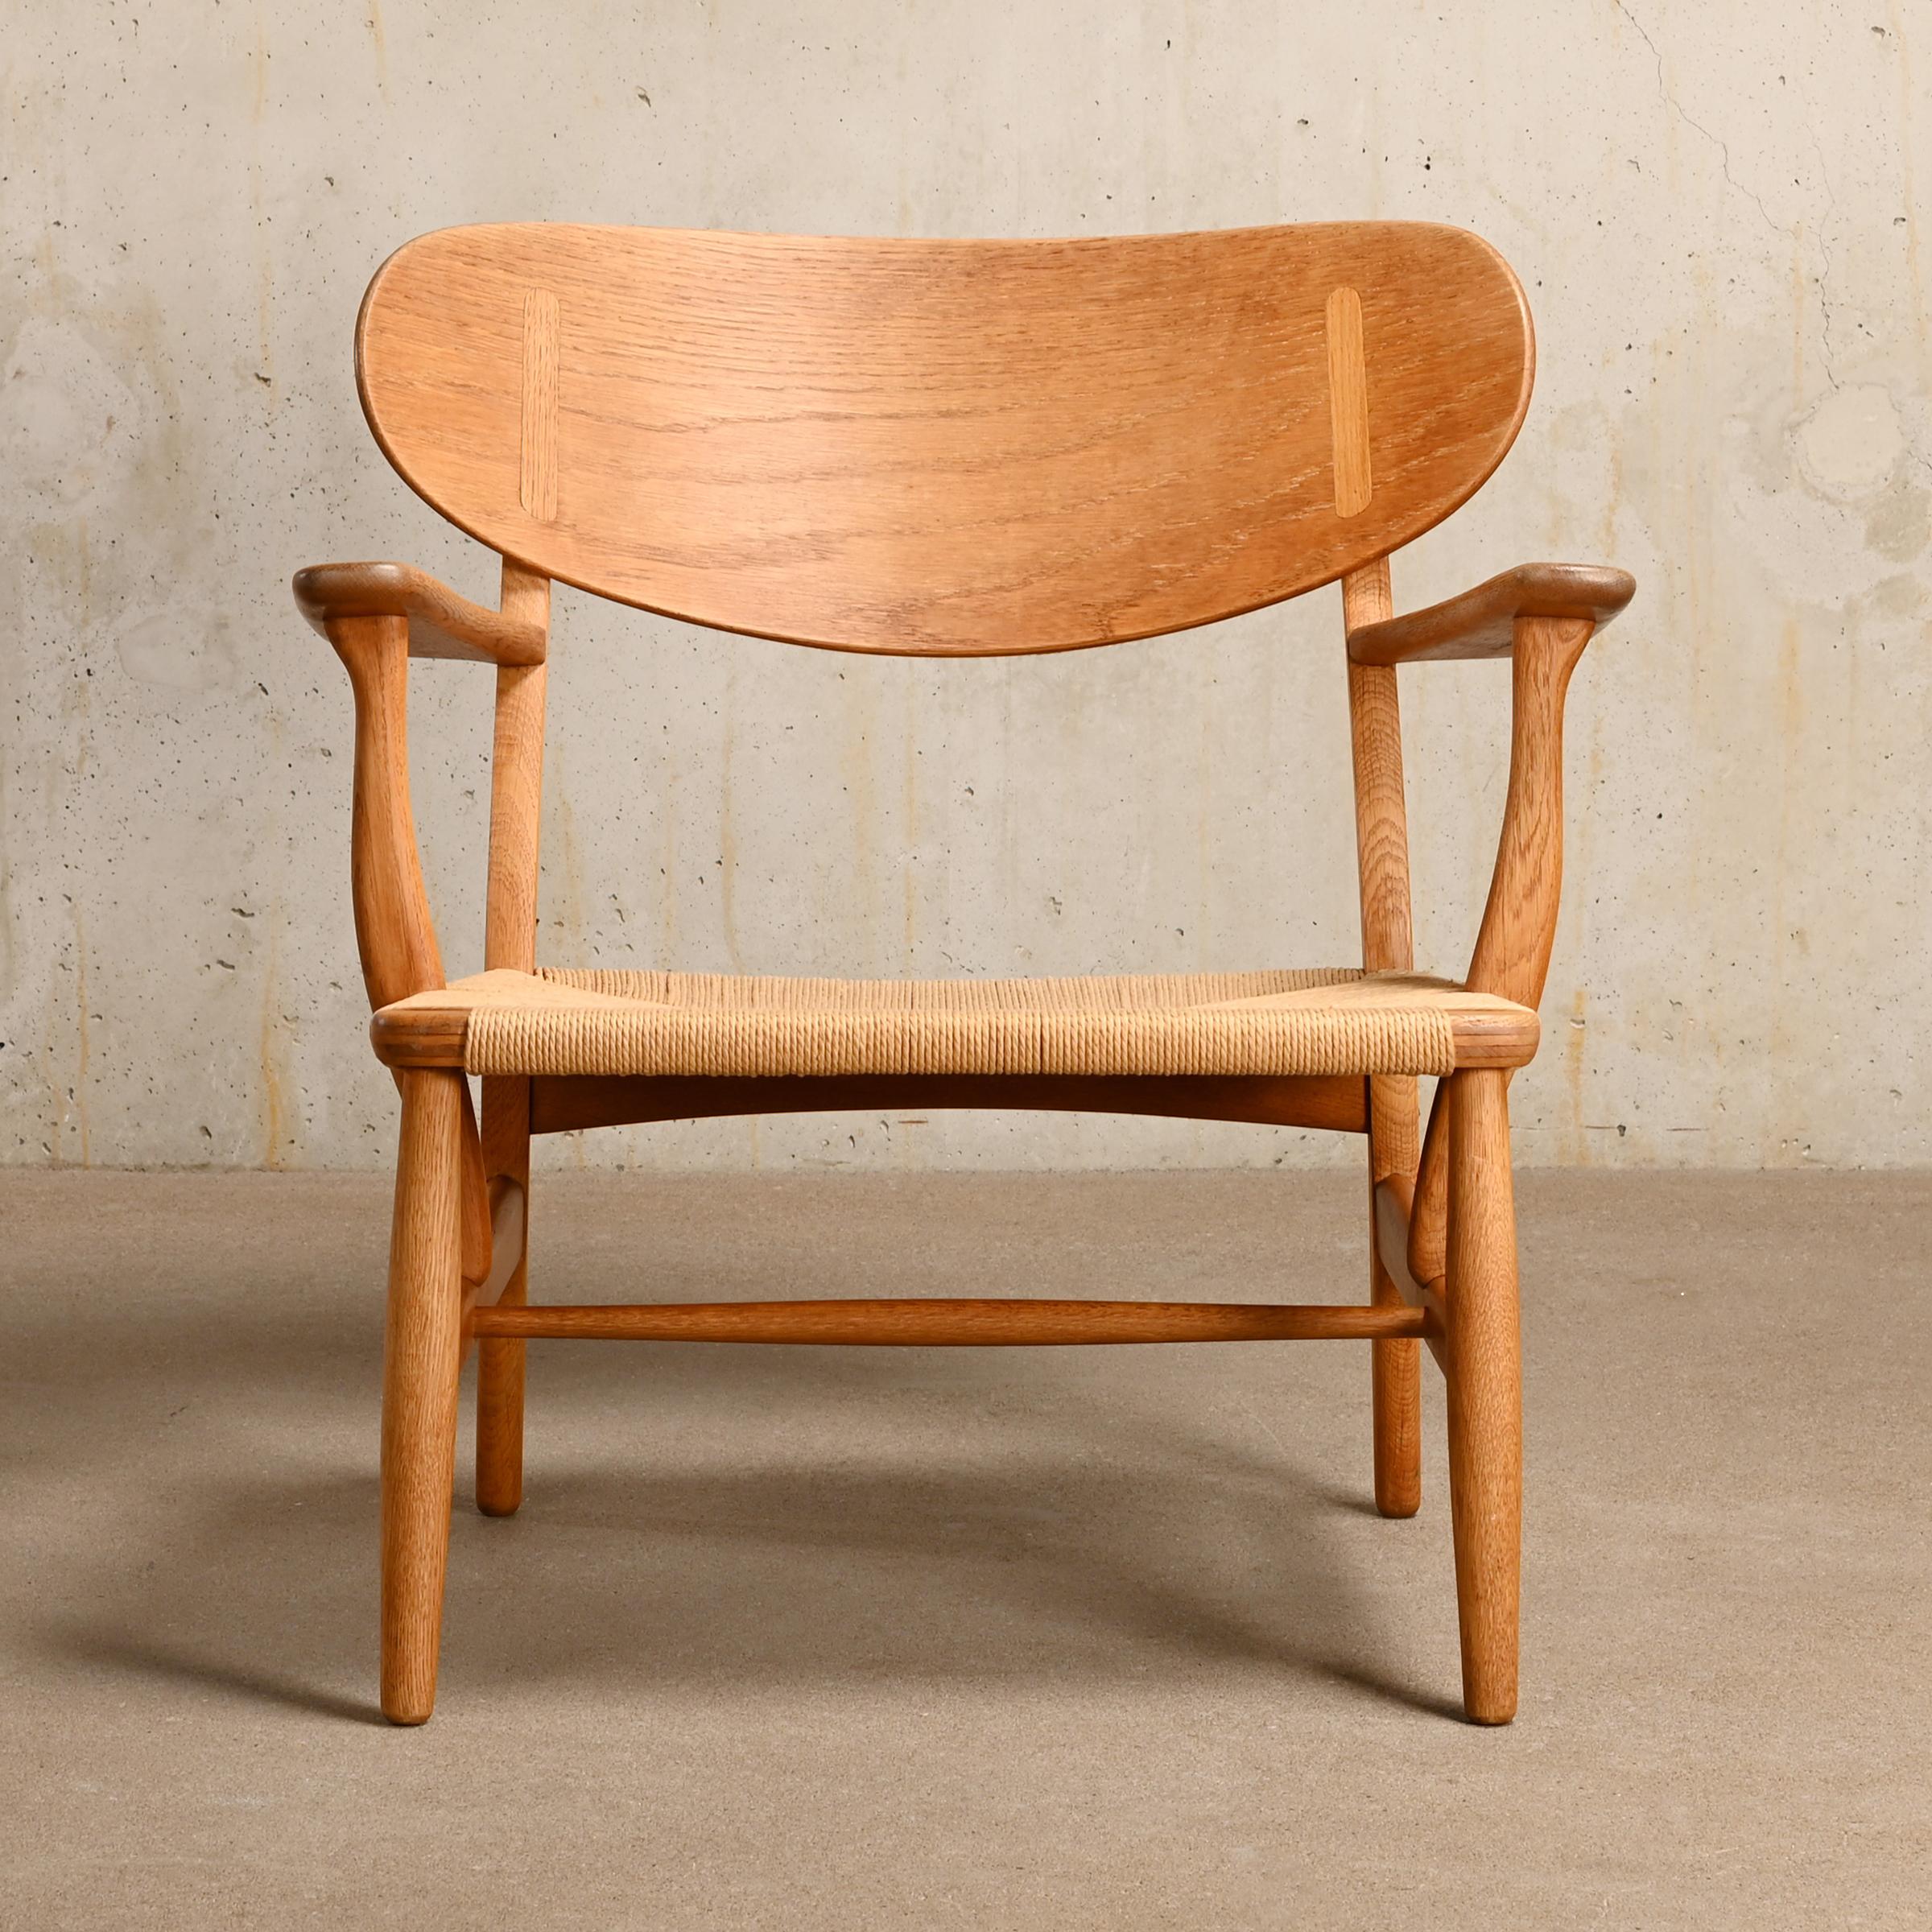 The beautiful and elegant CH22 Easy Chair is one of the many design icons by Hans J. Wegner for Carl Hansen & Son, Denmark designed in 1950. Great collaboration between aesthetics, craftsmanship and use of materials resulting in a well proportioned